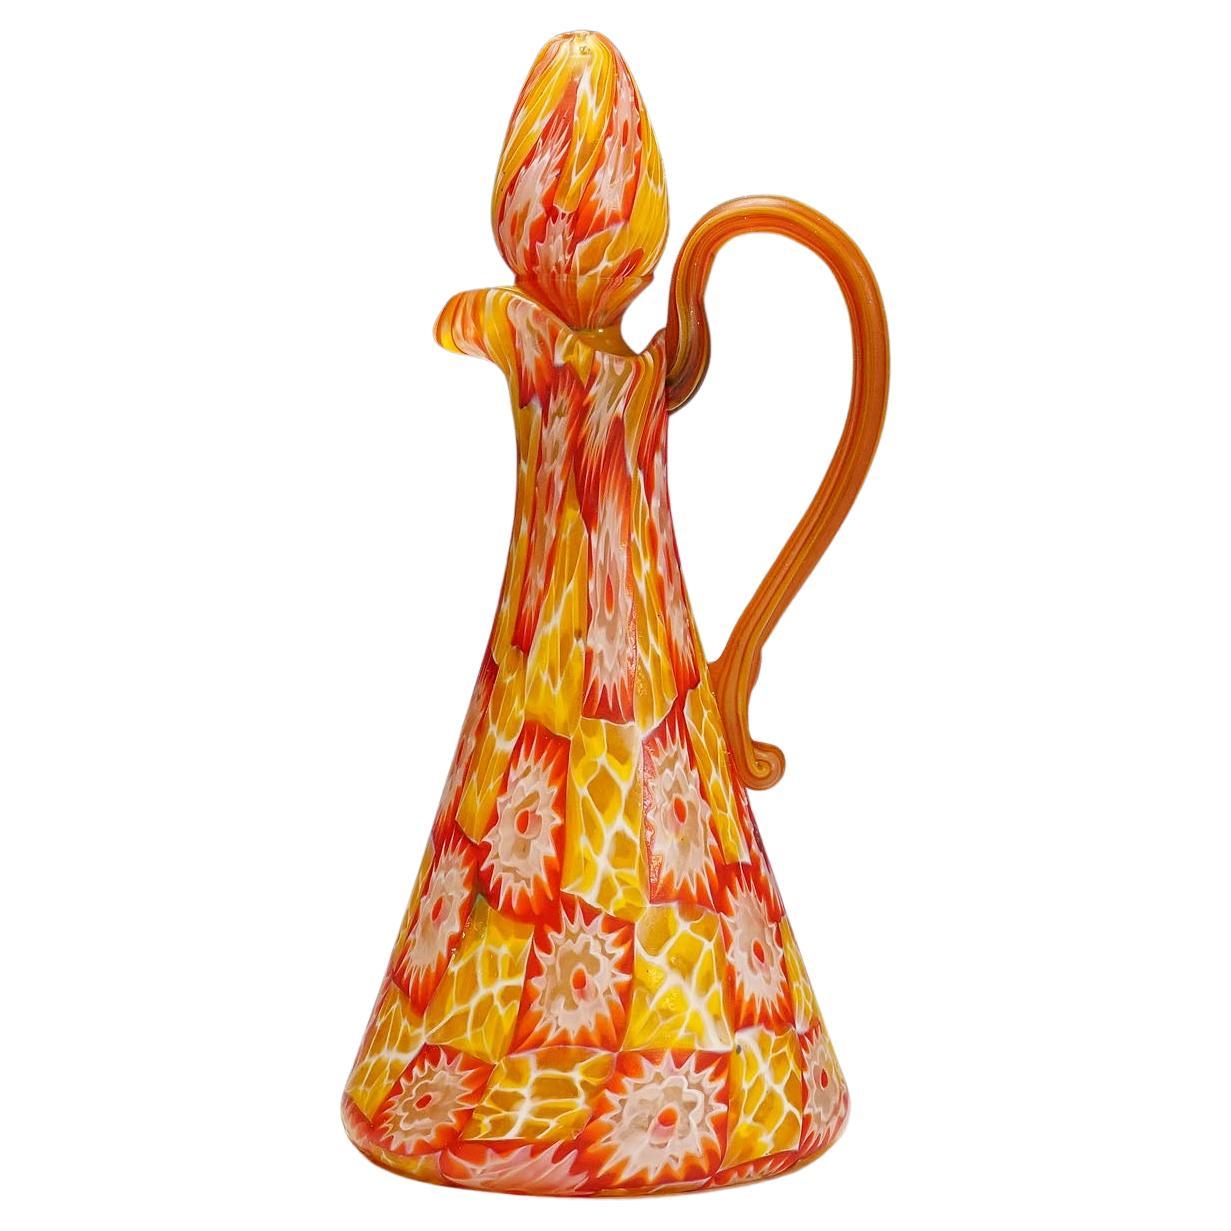 Antique Millefiori Jug with Handles by Fratelli Toso, Murano, circa 1920